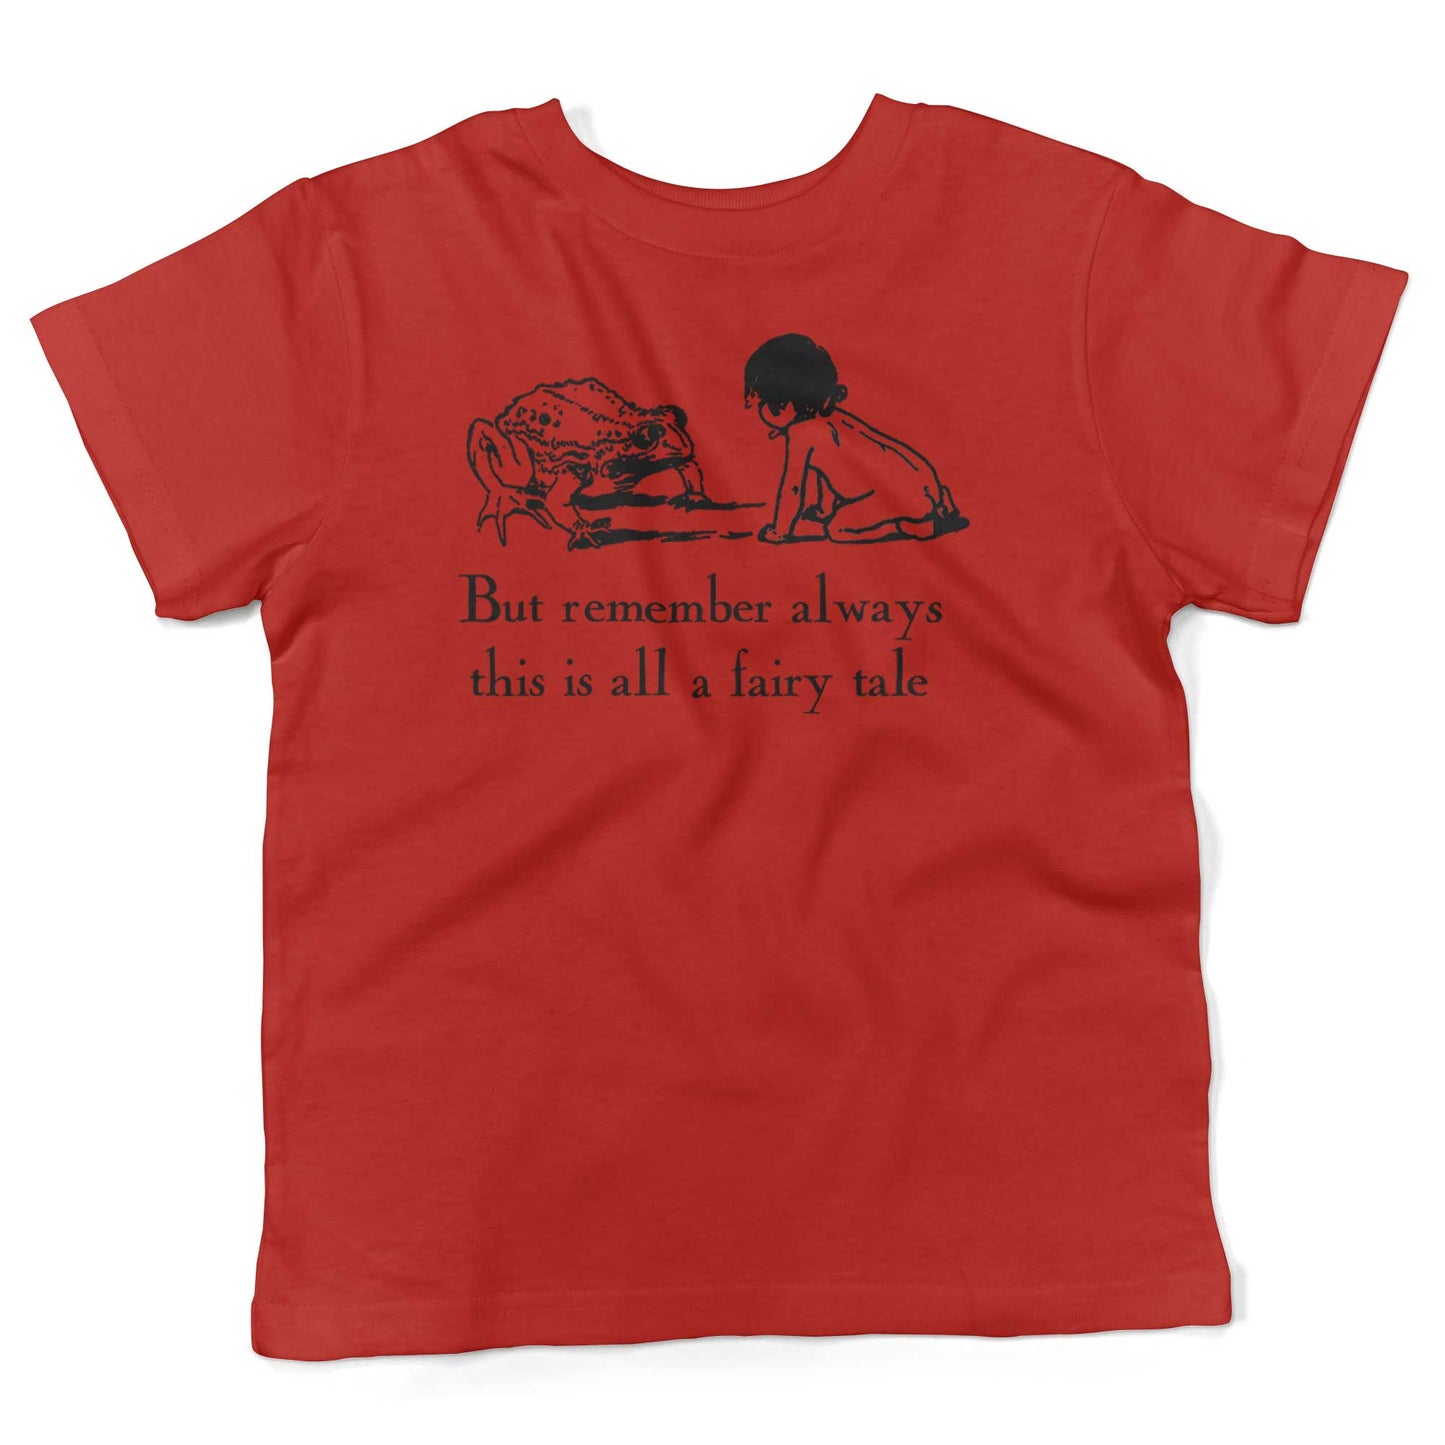 But remember always this is all a fairy tale Toddler Shirt-Red-2T